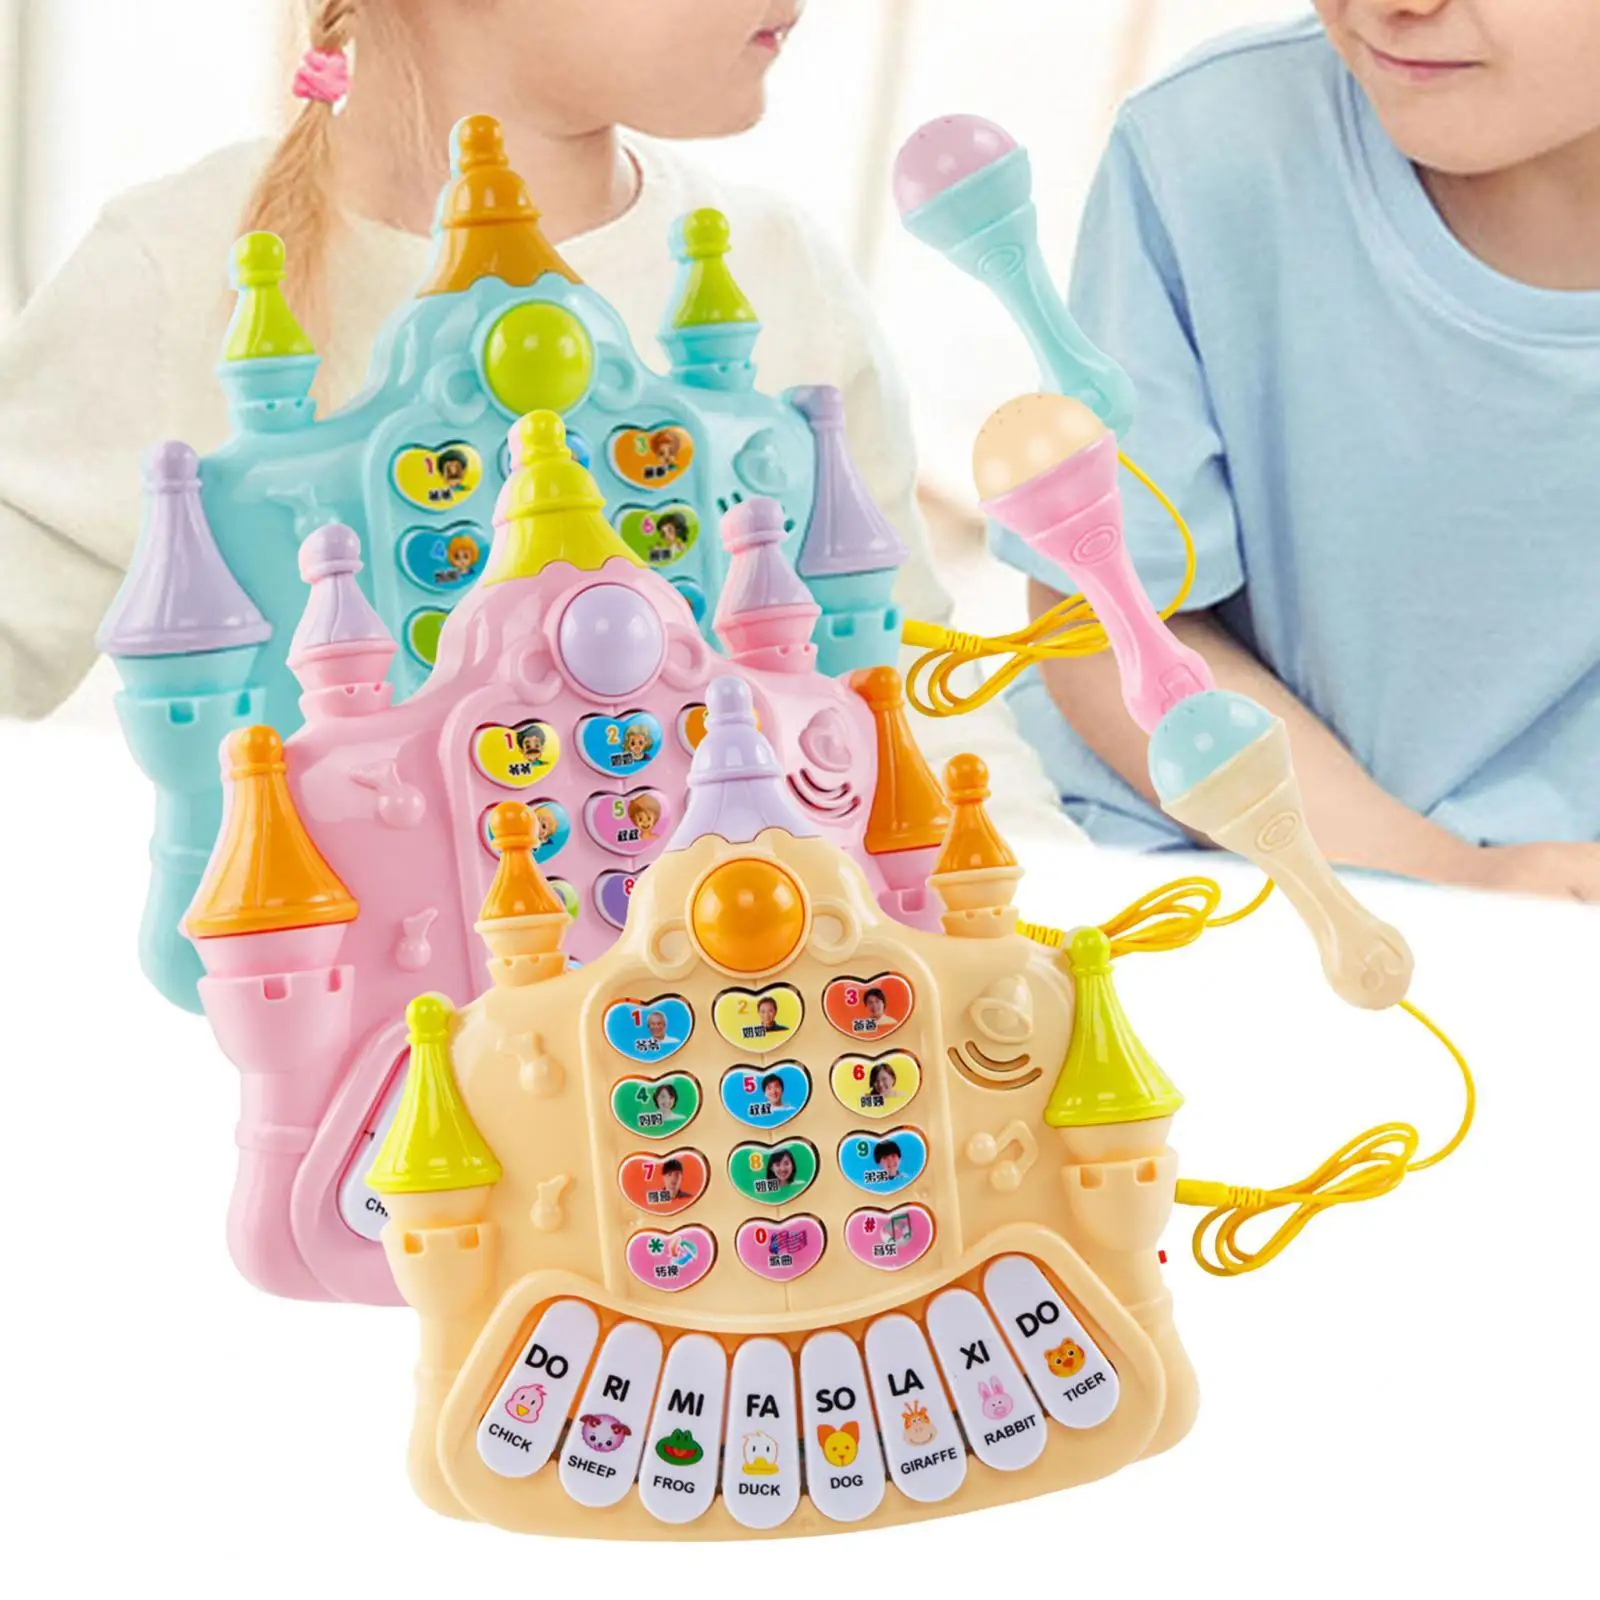 Music Toy Party Favors Early Learning Toys Musical Piano Toy Music Piano Toy for Kids Baby Children Boys Holiday Gifts